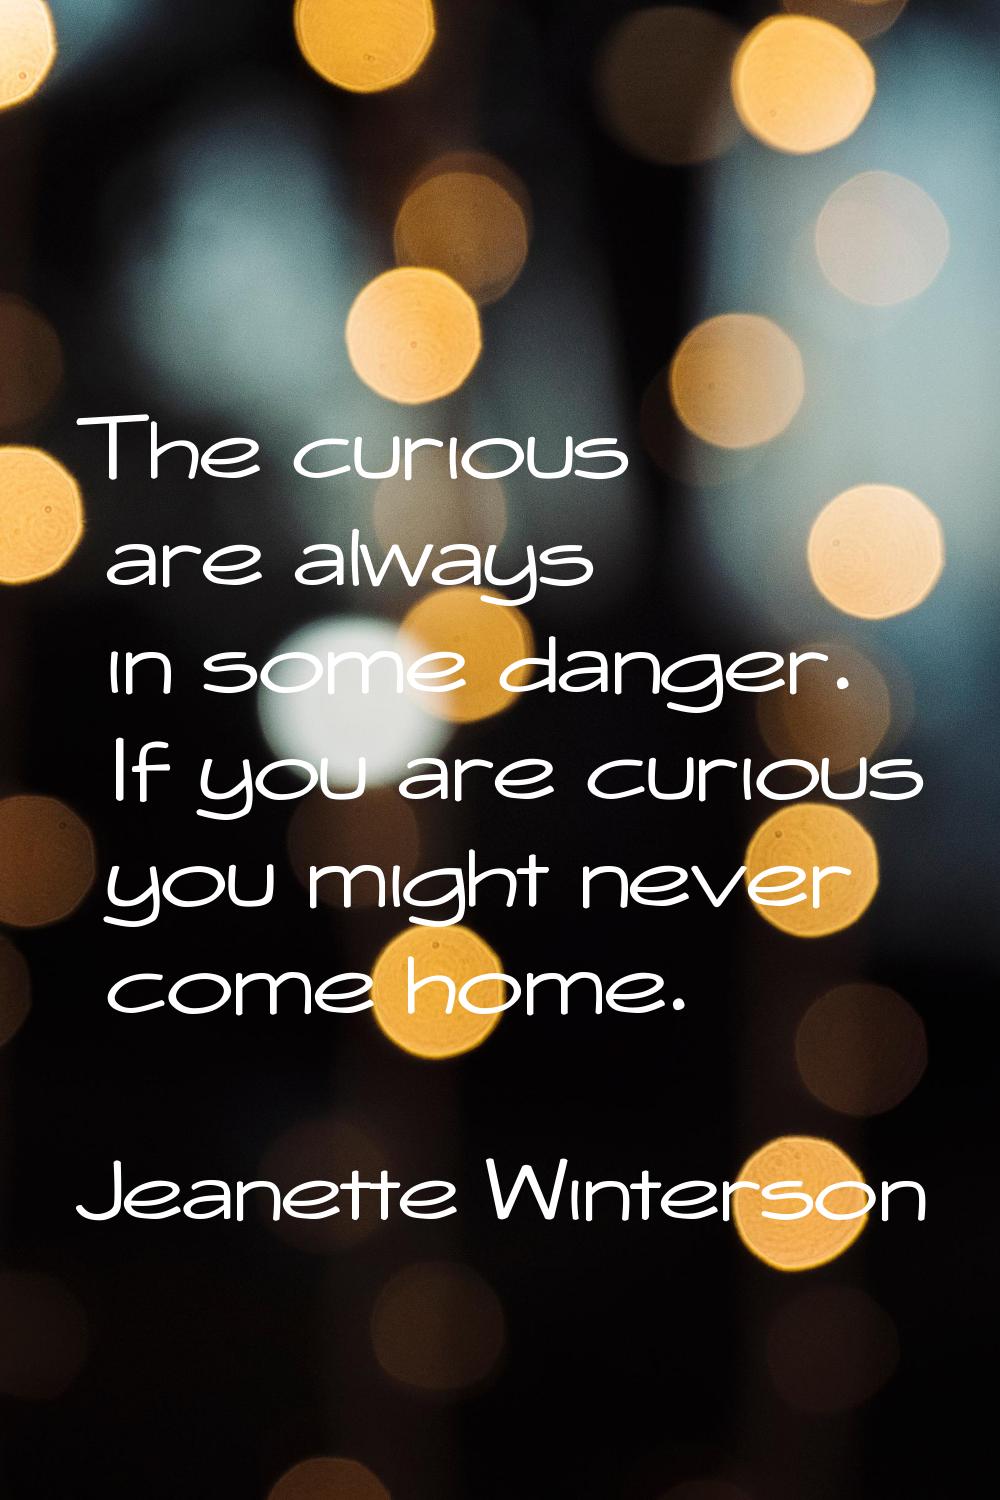 The curious are always in some danger. If you are curious you might never come home.